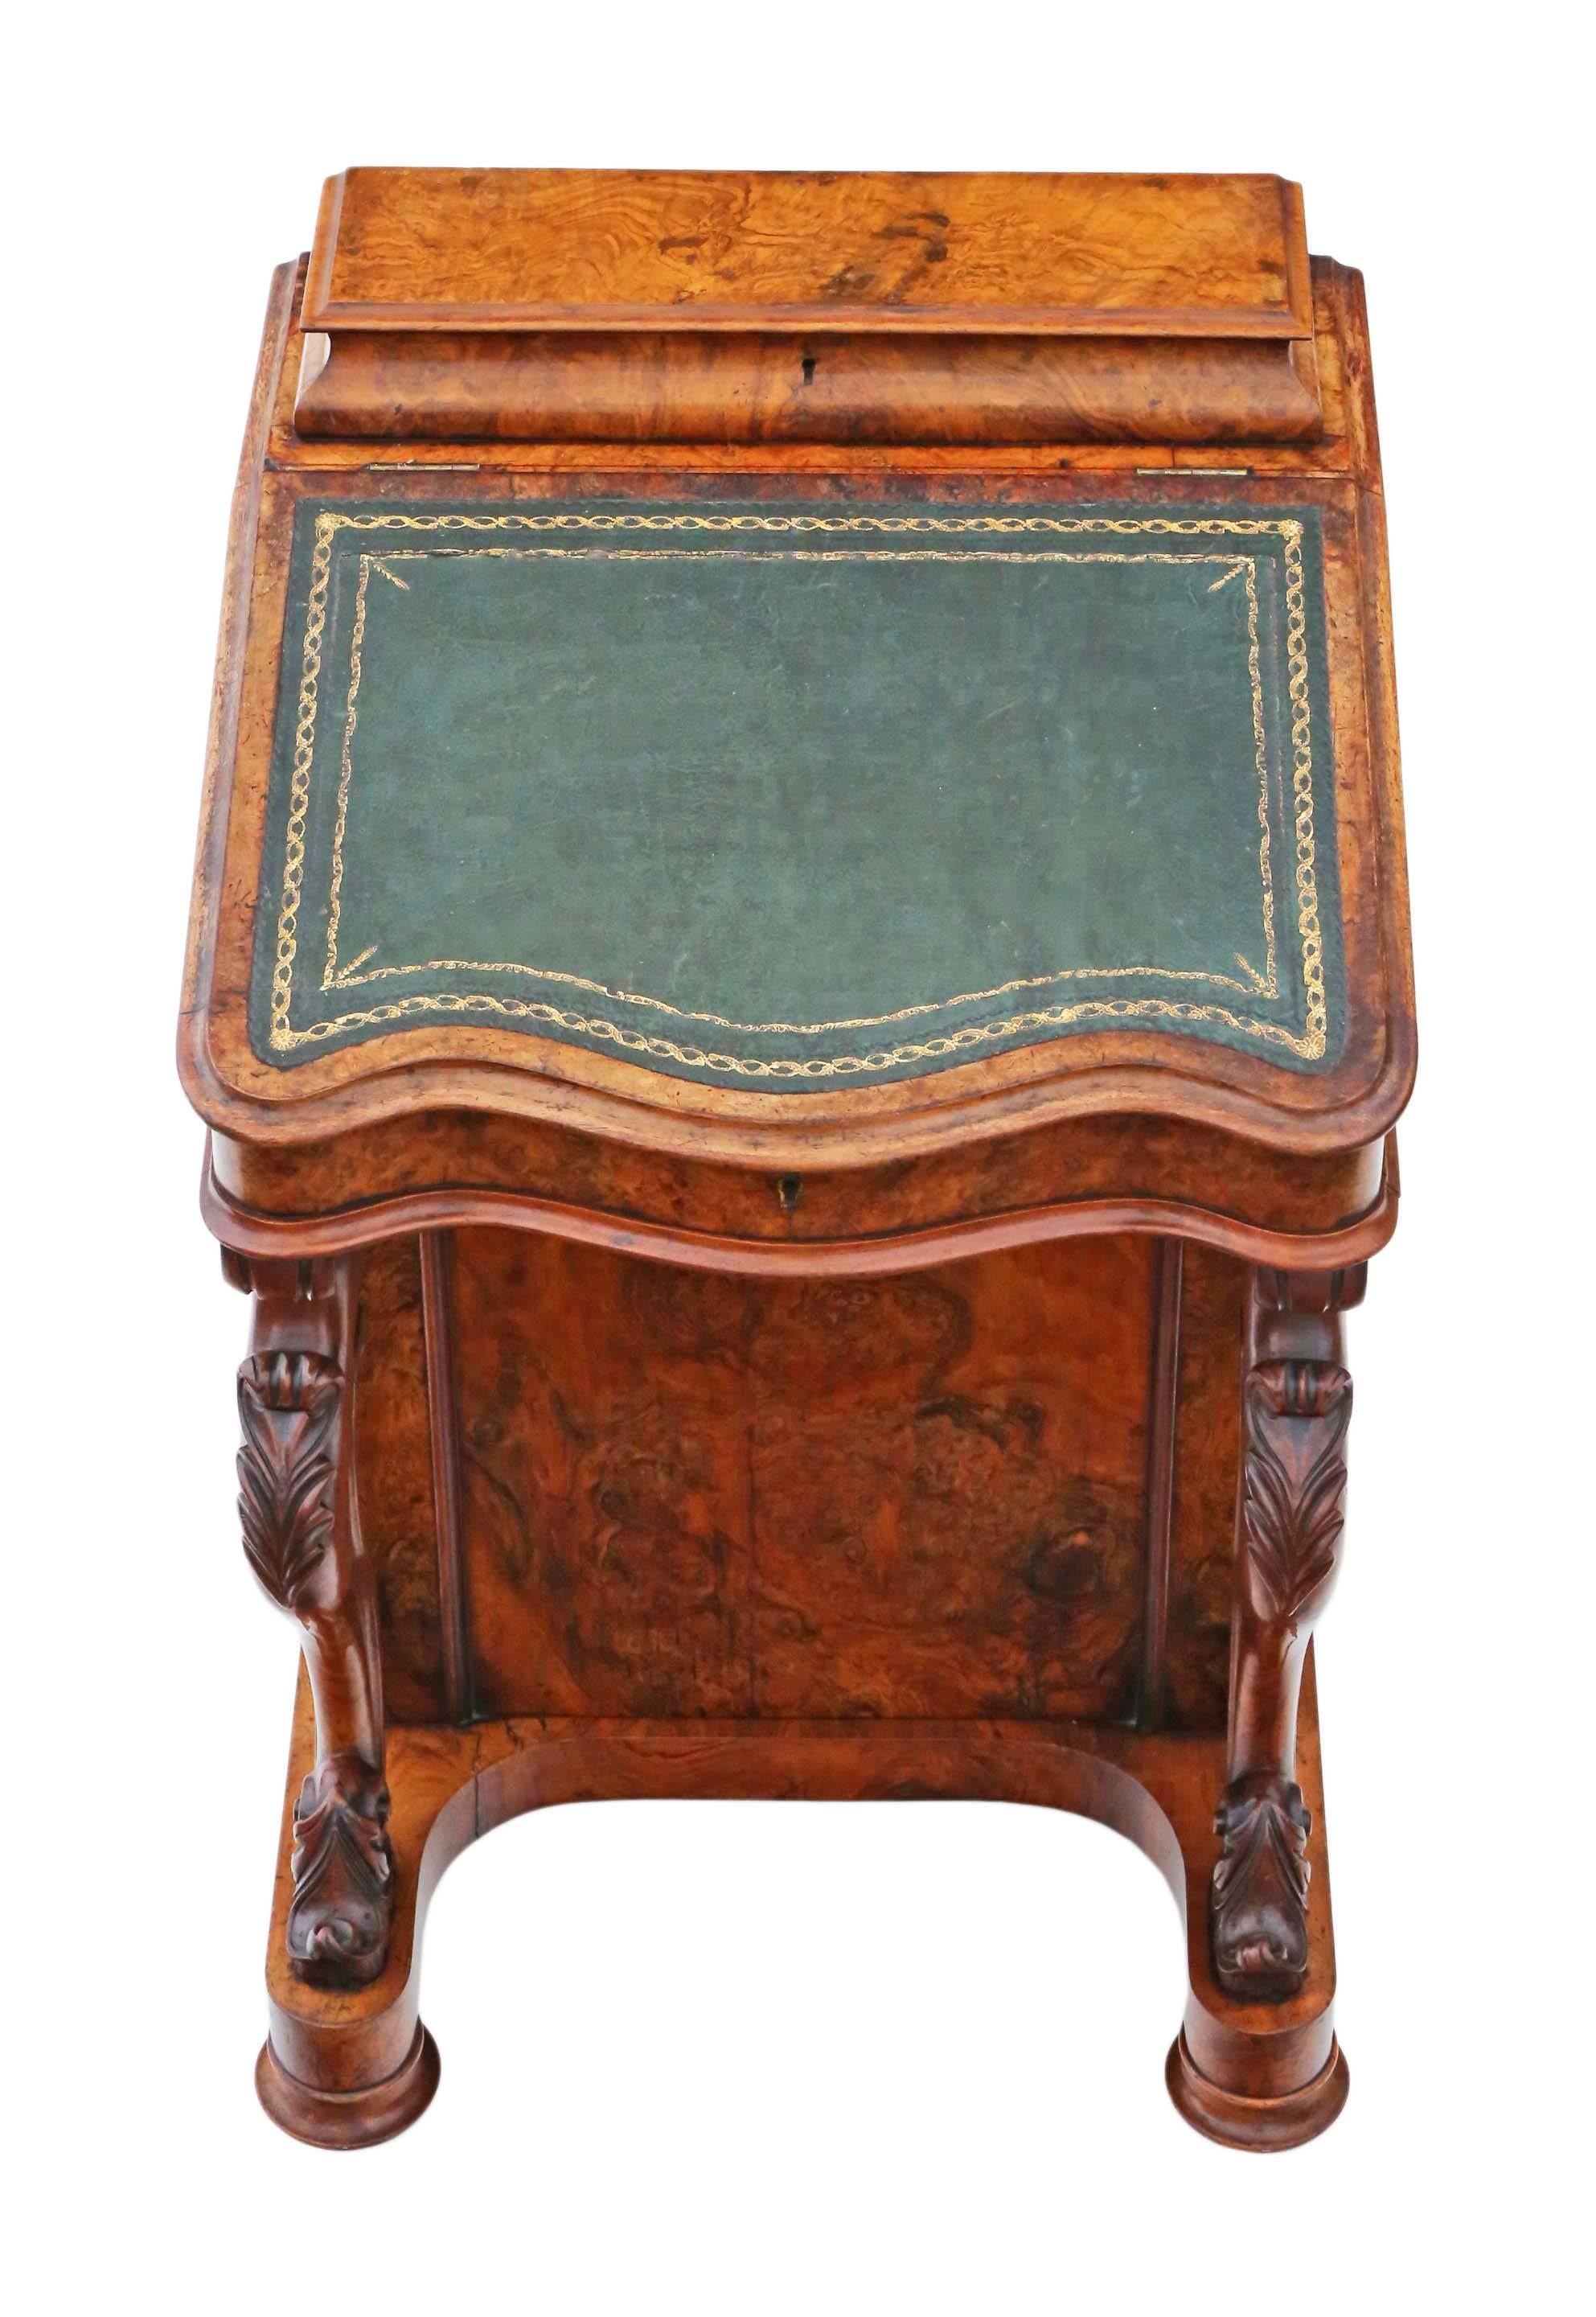 Antique quality Victorian, circa 1870 burr walnut Davenport, writing table or desk.

This is a lovely quality Davenport, that is full of age, charm and character. Solid and heavy, with no loose joints and no woodworm.

Fantastic styling, with